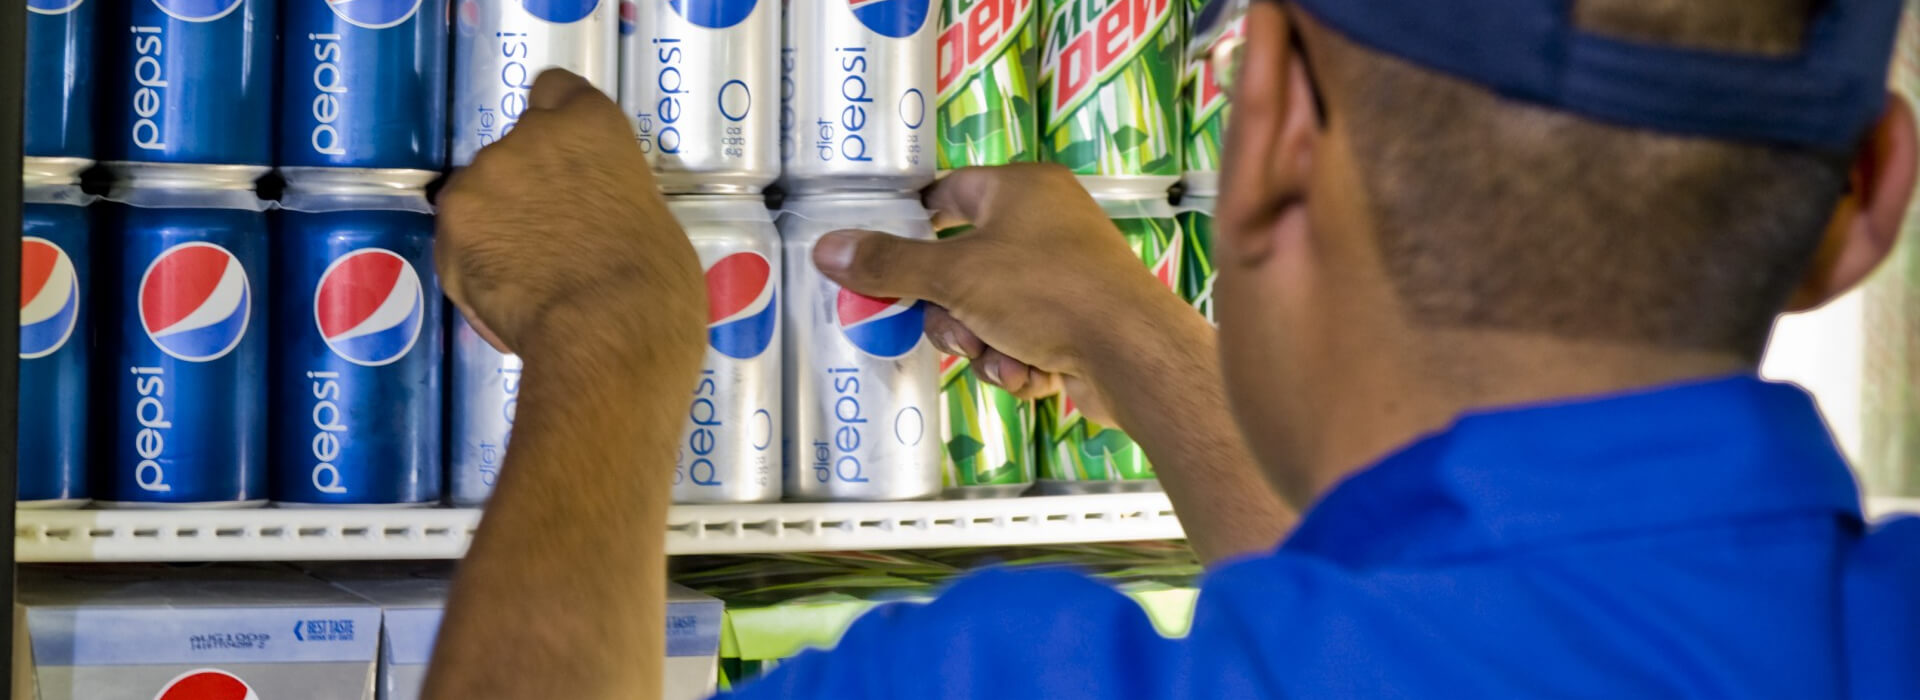 Worker loading cans of Pepsi into a refrigerator.